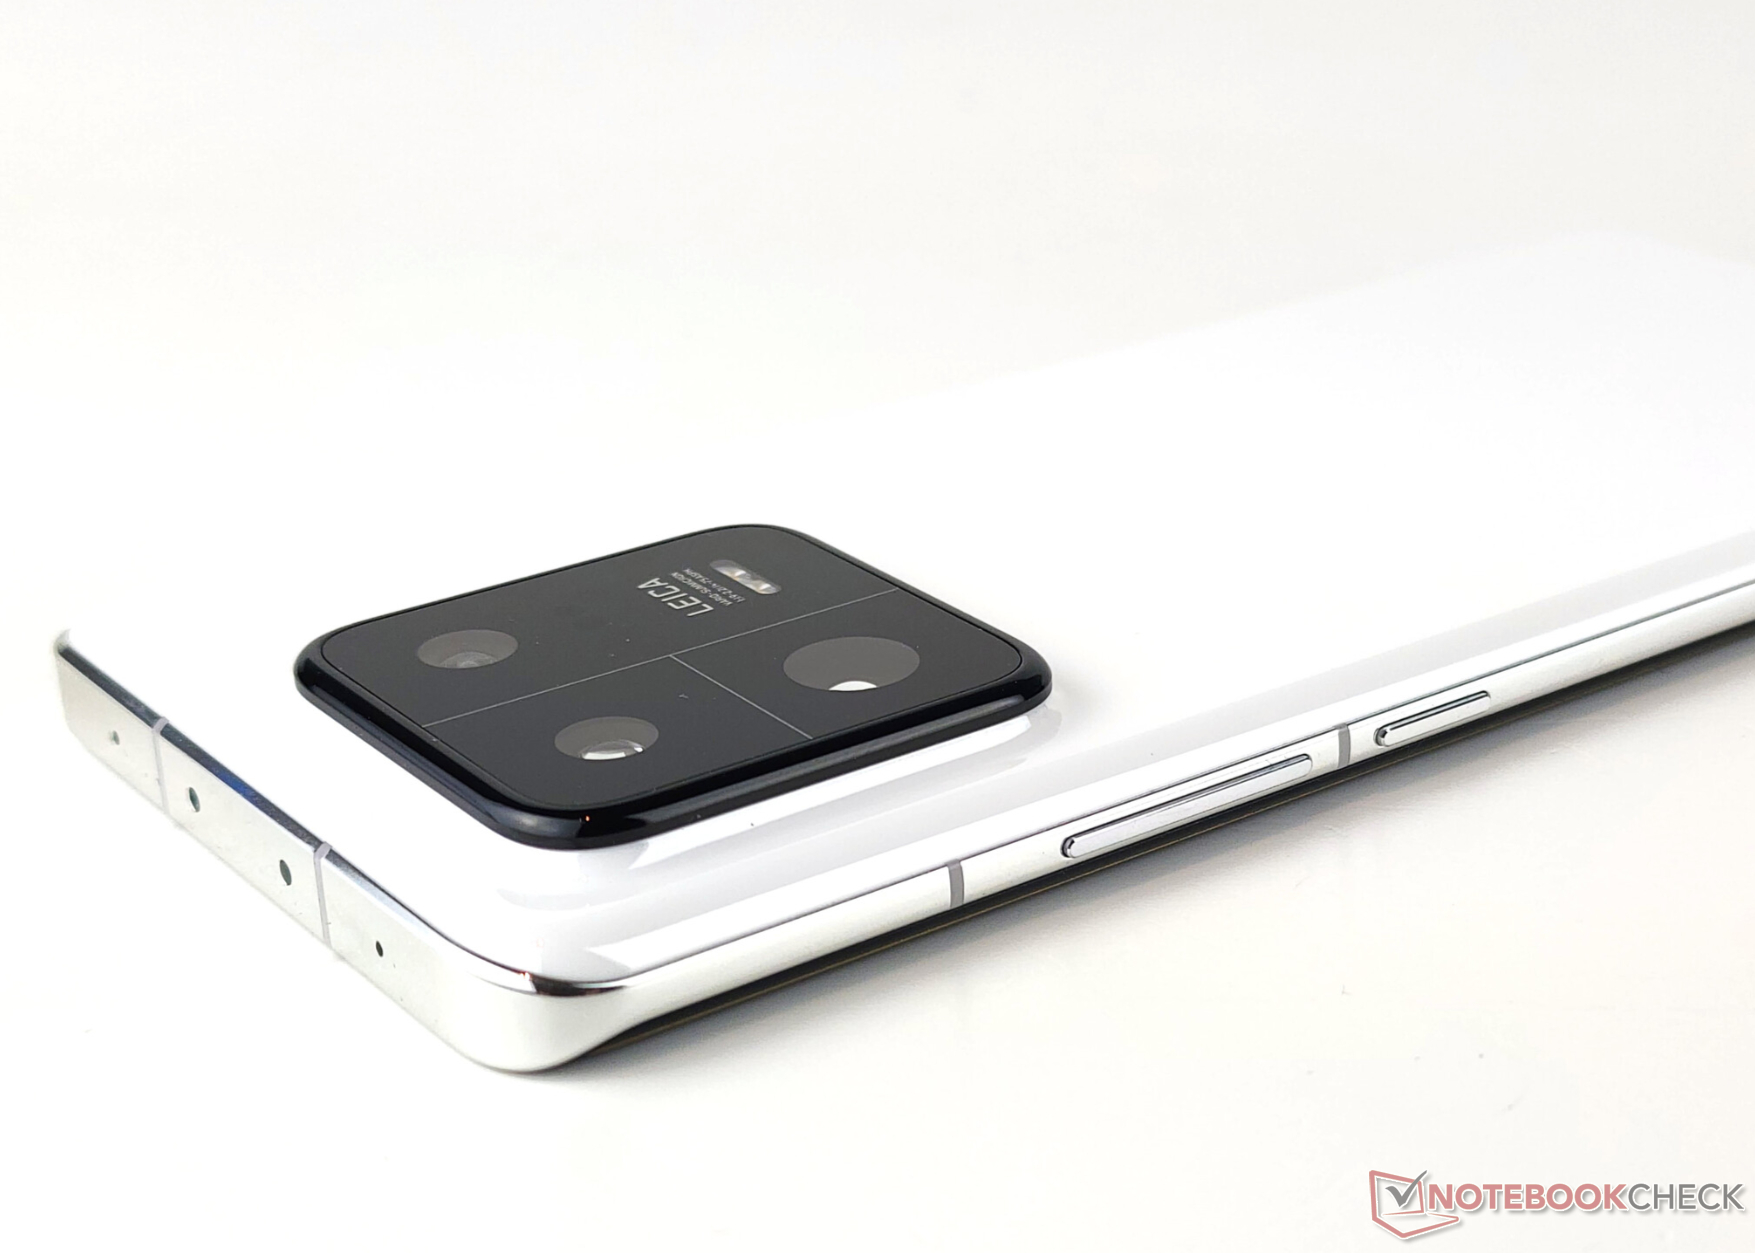 Xiaomi 14 Pro to launch with unchanged 120 W wired charging -   News